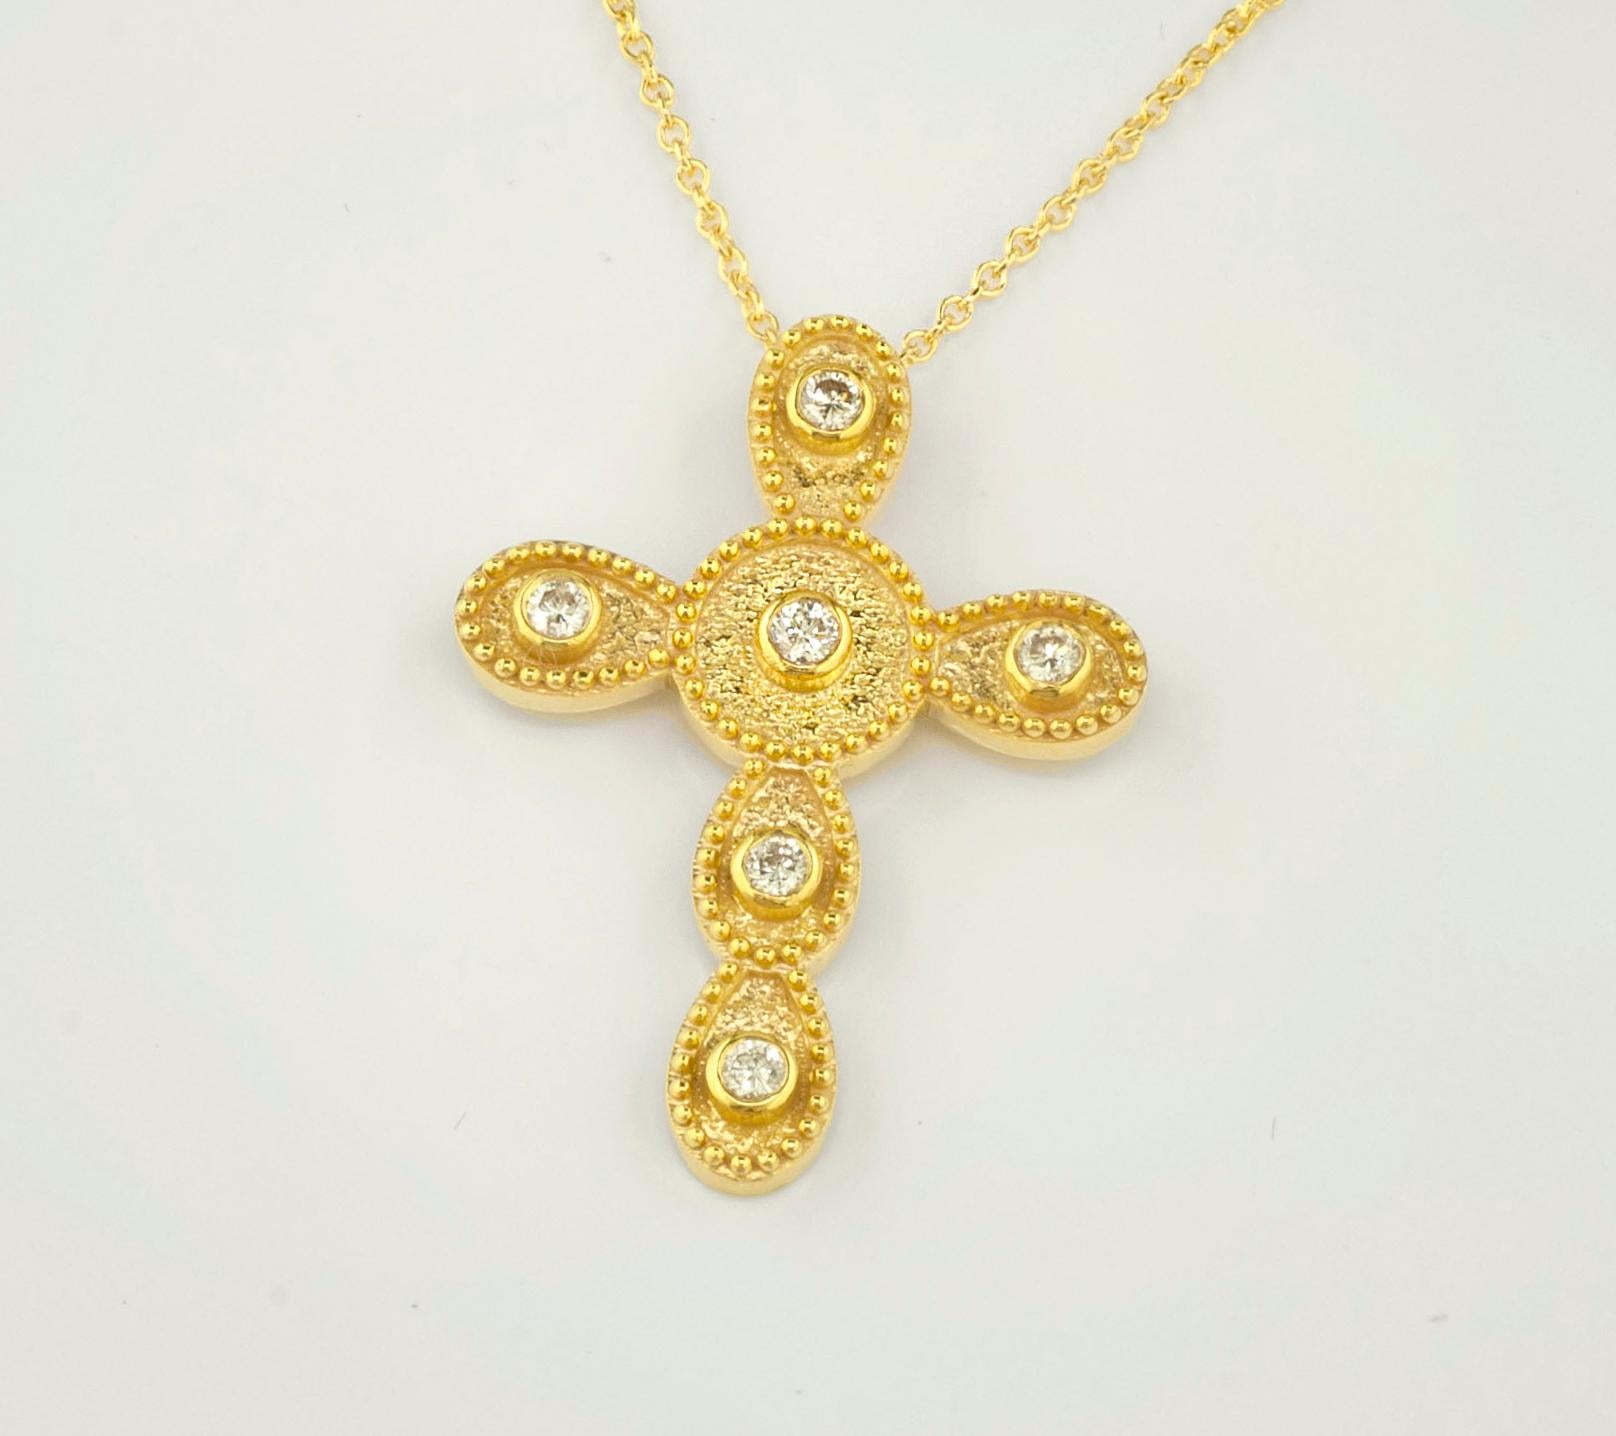 Brilliant Cut Georgios Collections 18 Karat Yellow Gold Diamond Byzantine Style Cross Necklace For Sale